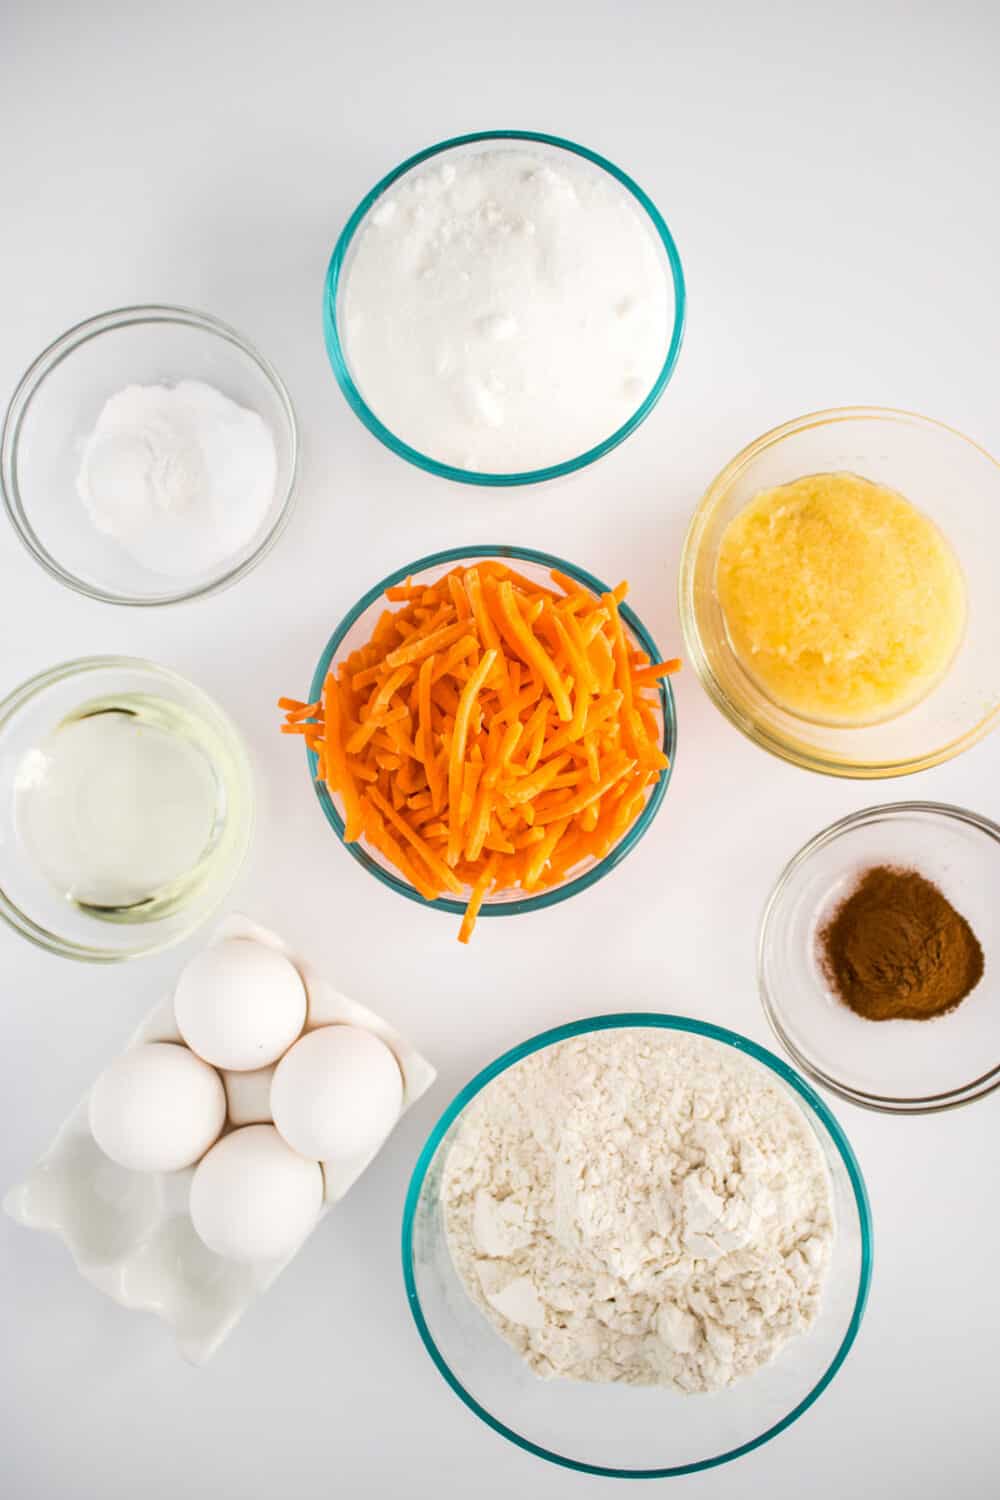 Ingredients in glass bowls to make carrot cake